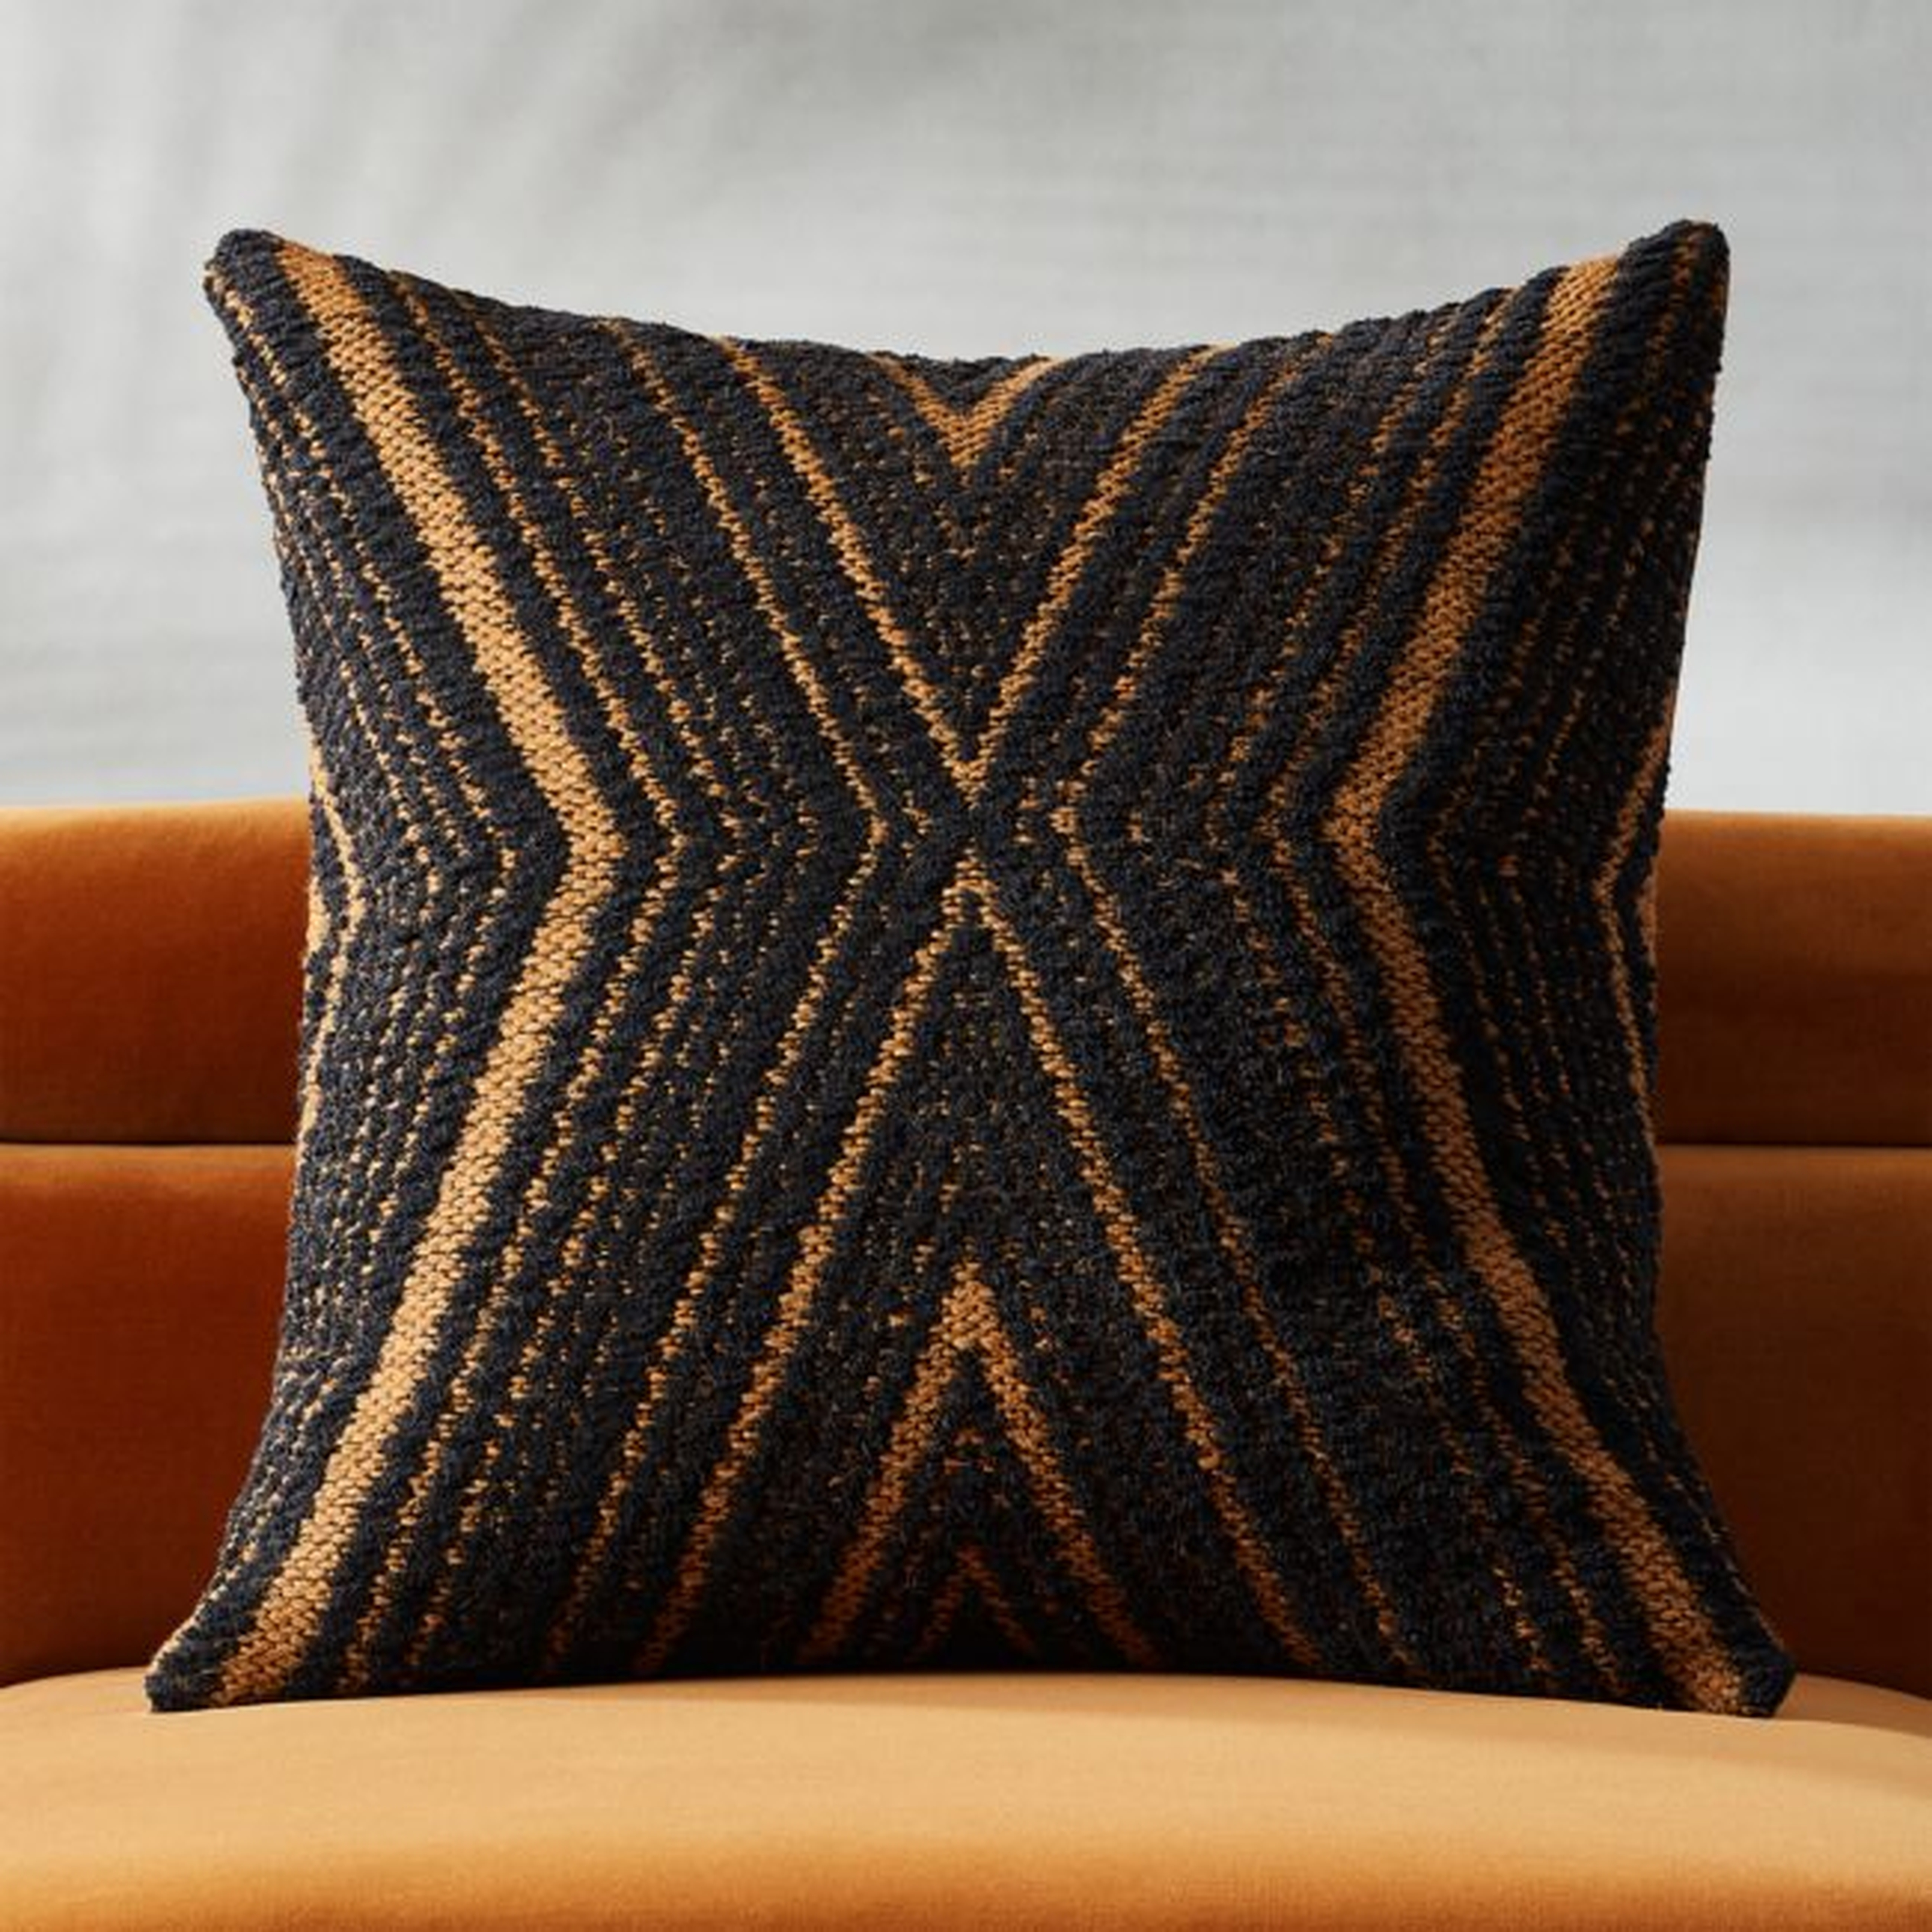 Onca Black Throw Pillow with Feather-Down Insert 23" - CB2